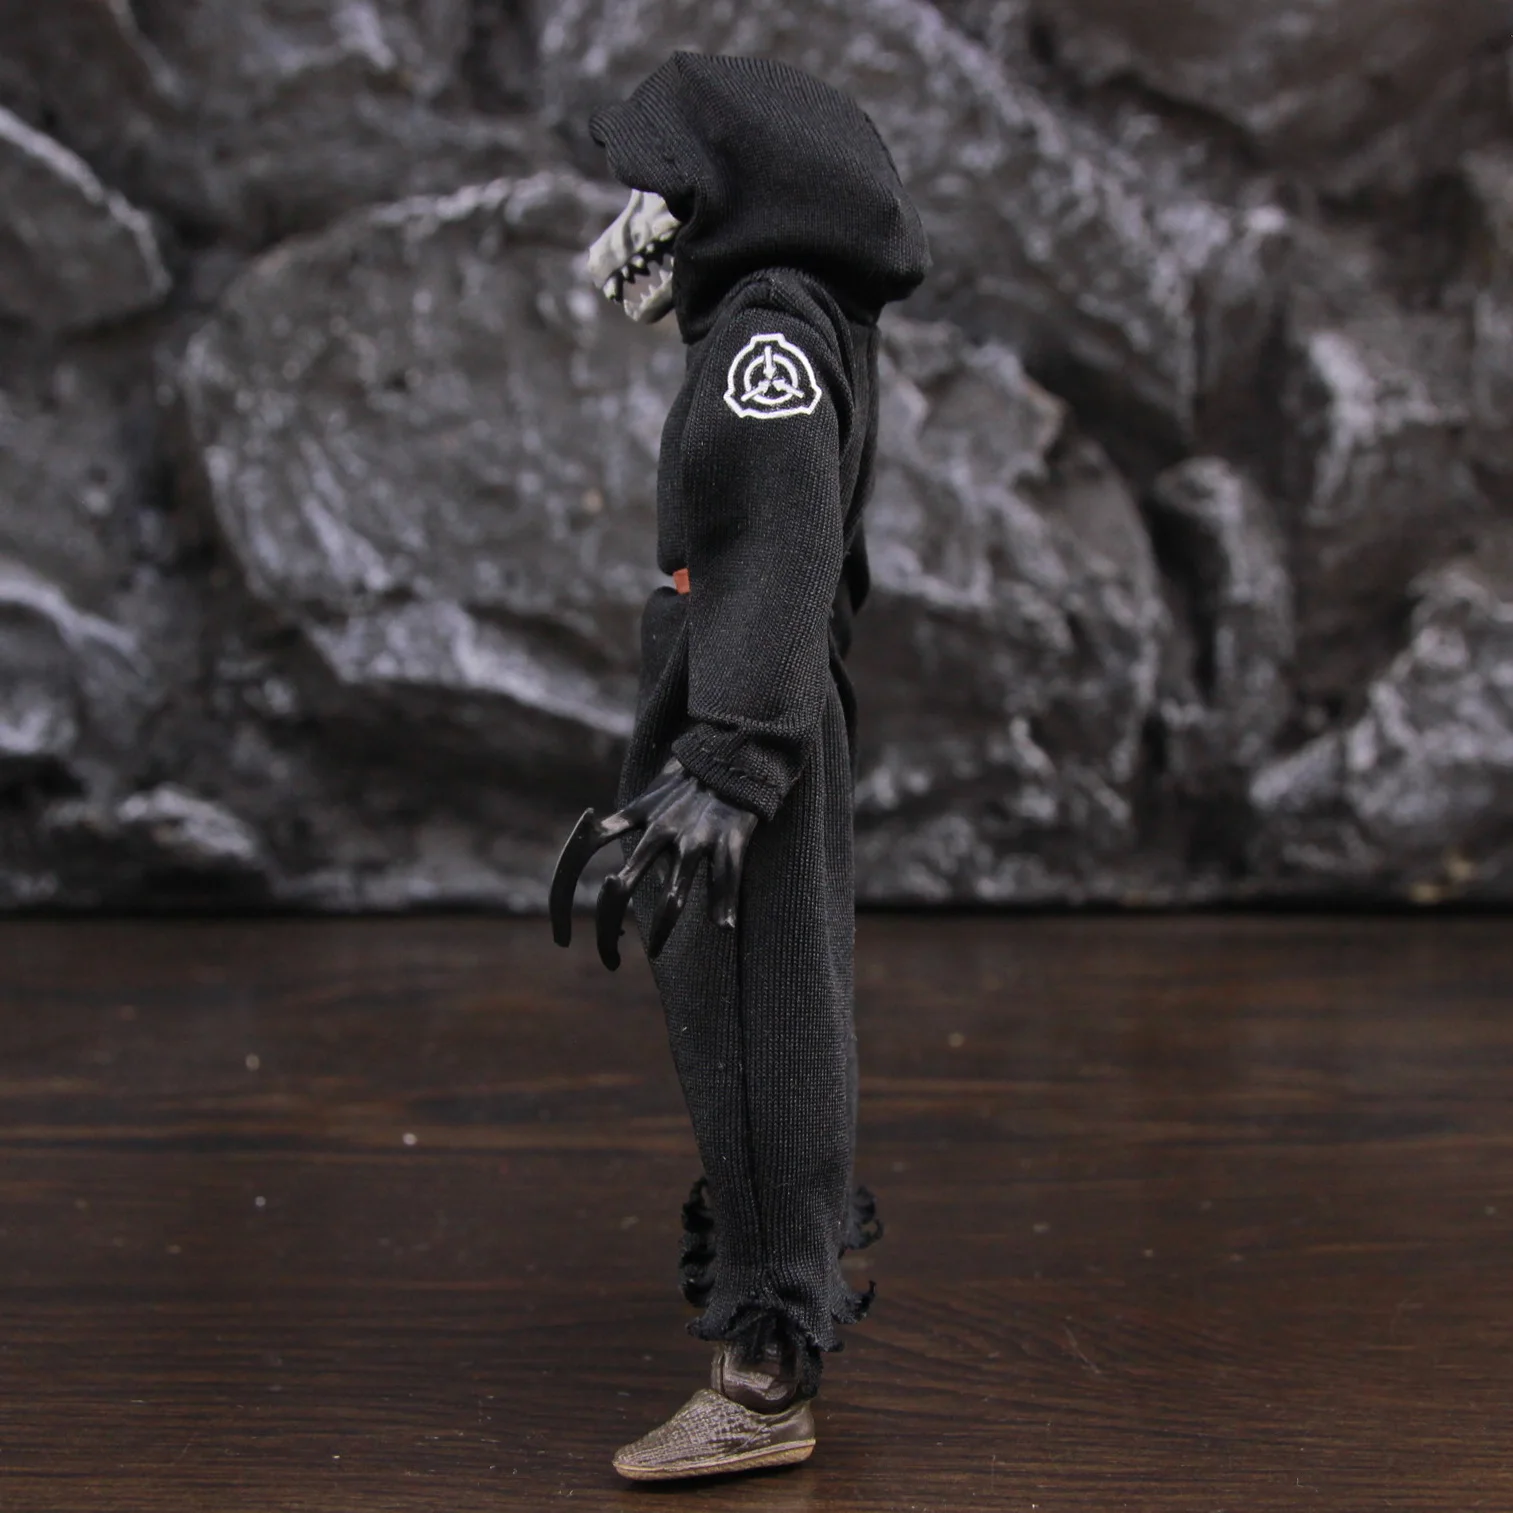 Scp-1471 Malo Ver 1.0.0 6 Action Figure 15cm Scp Foundation Euclid Site-45  1471 Horror Anime Toys Doll Model - Action Figures - AliExpress